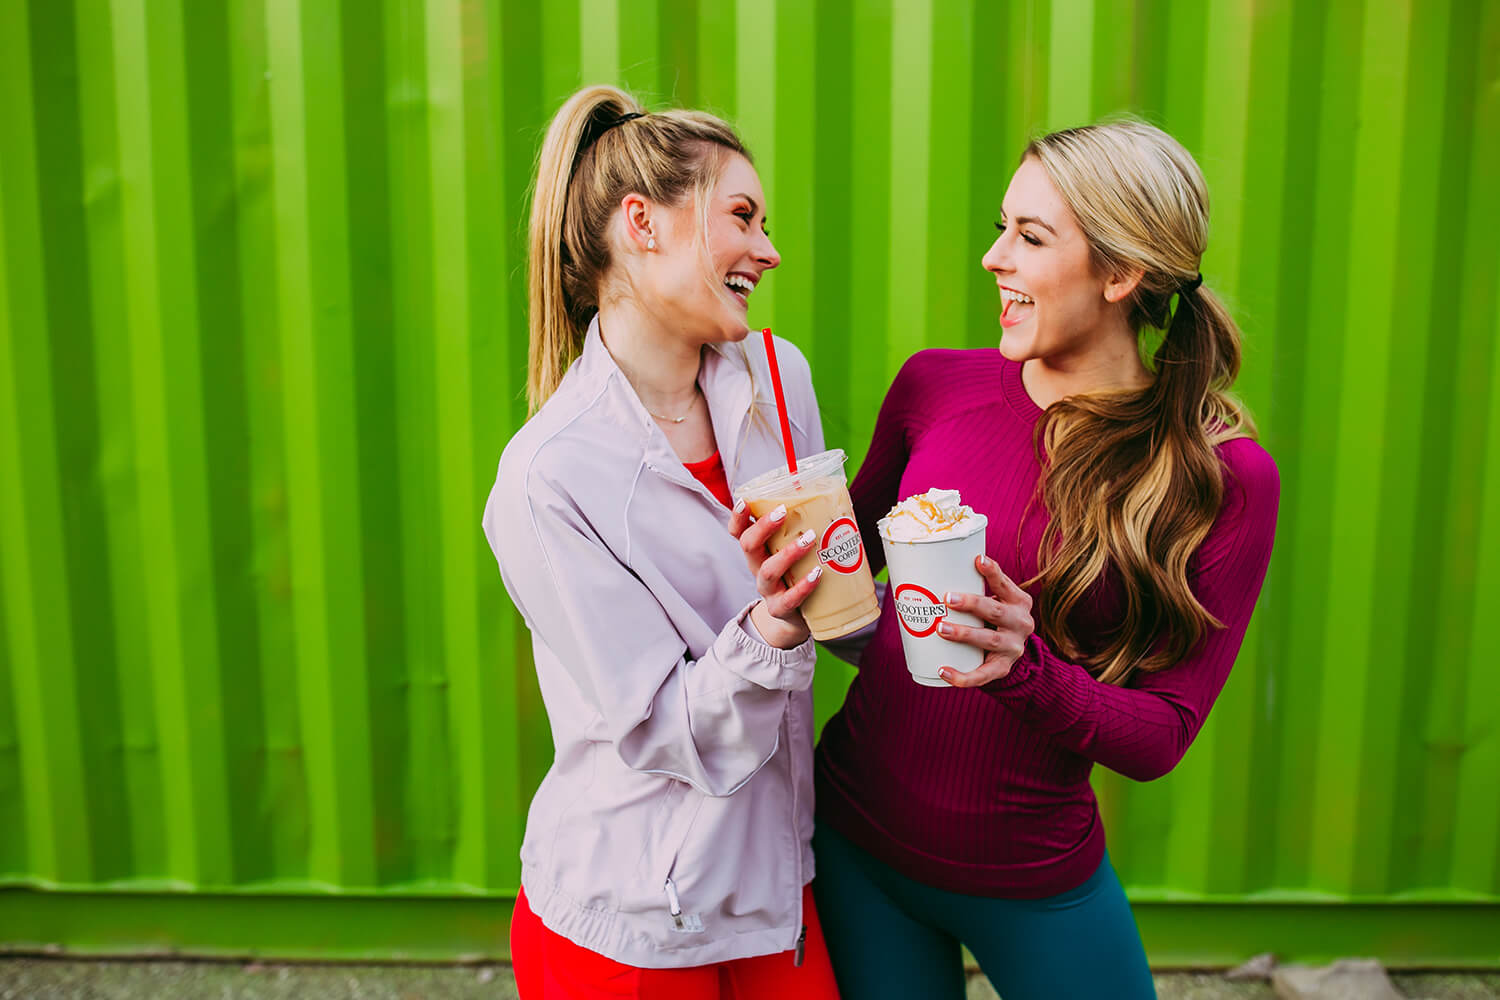 Two smiling women holding coffee in front of a green background